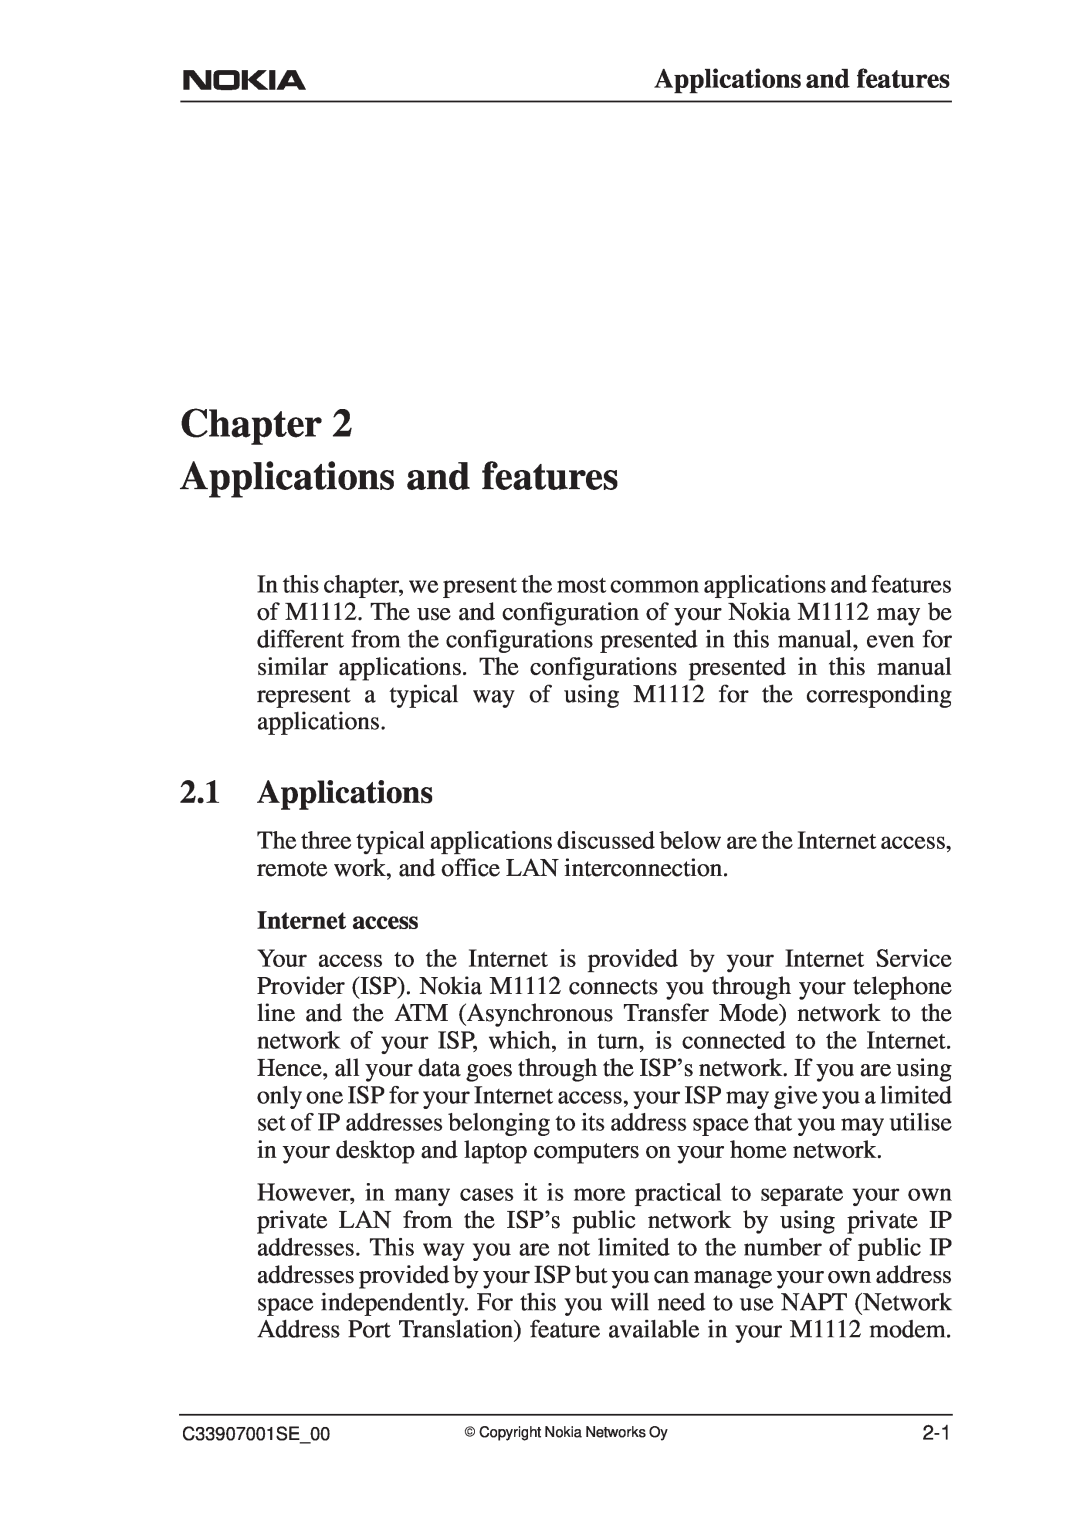 Nokia M1112 manual Chapter Applications and features 